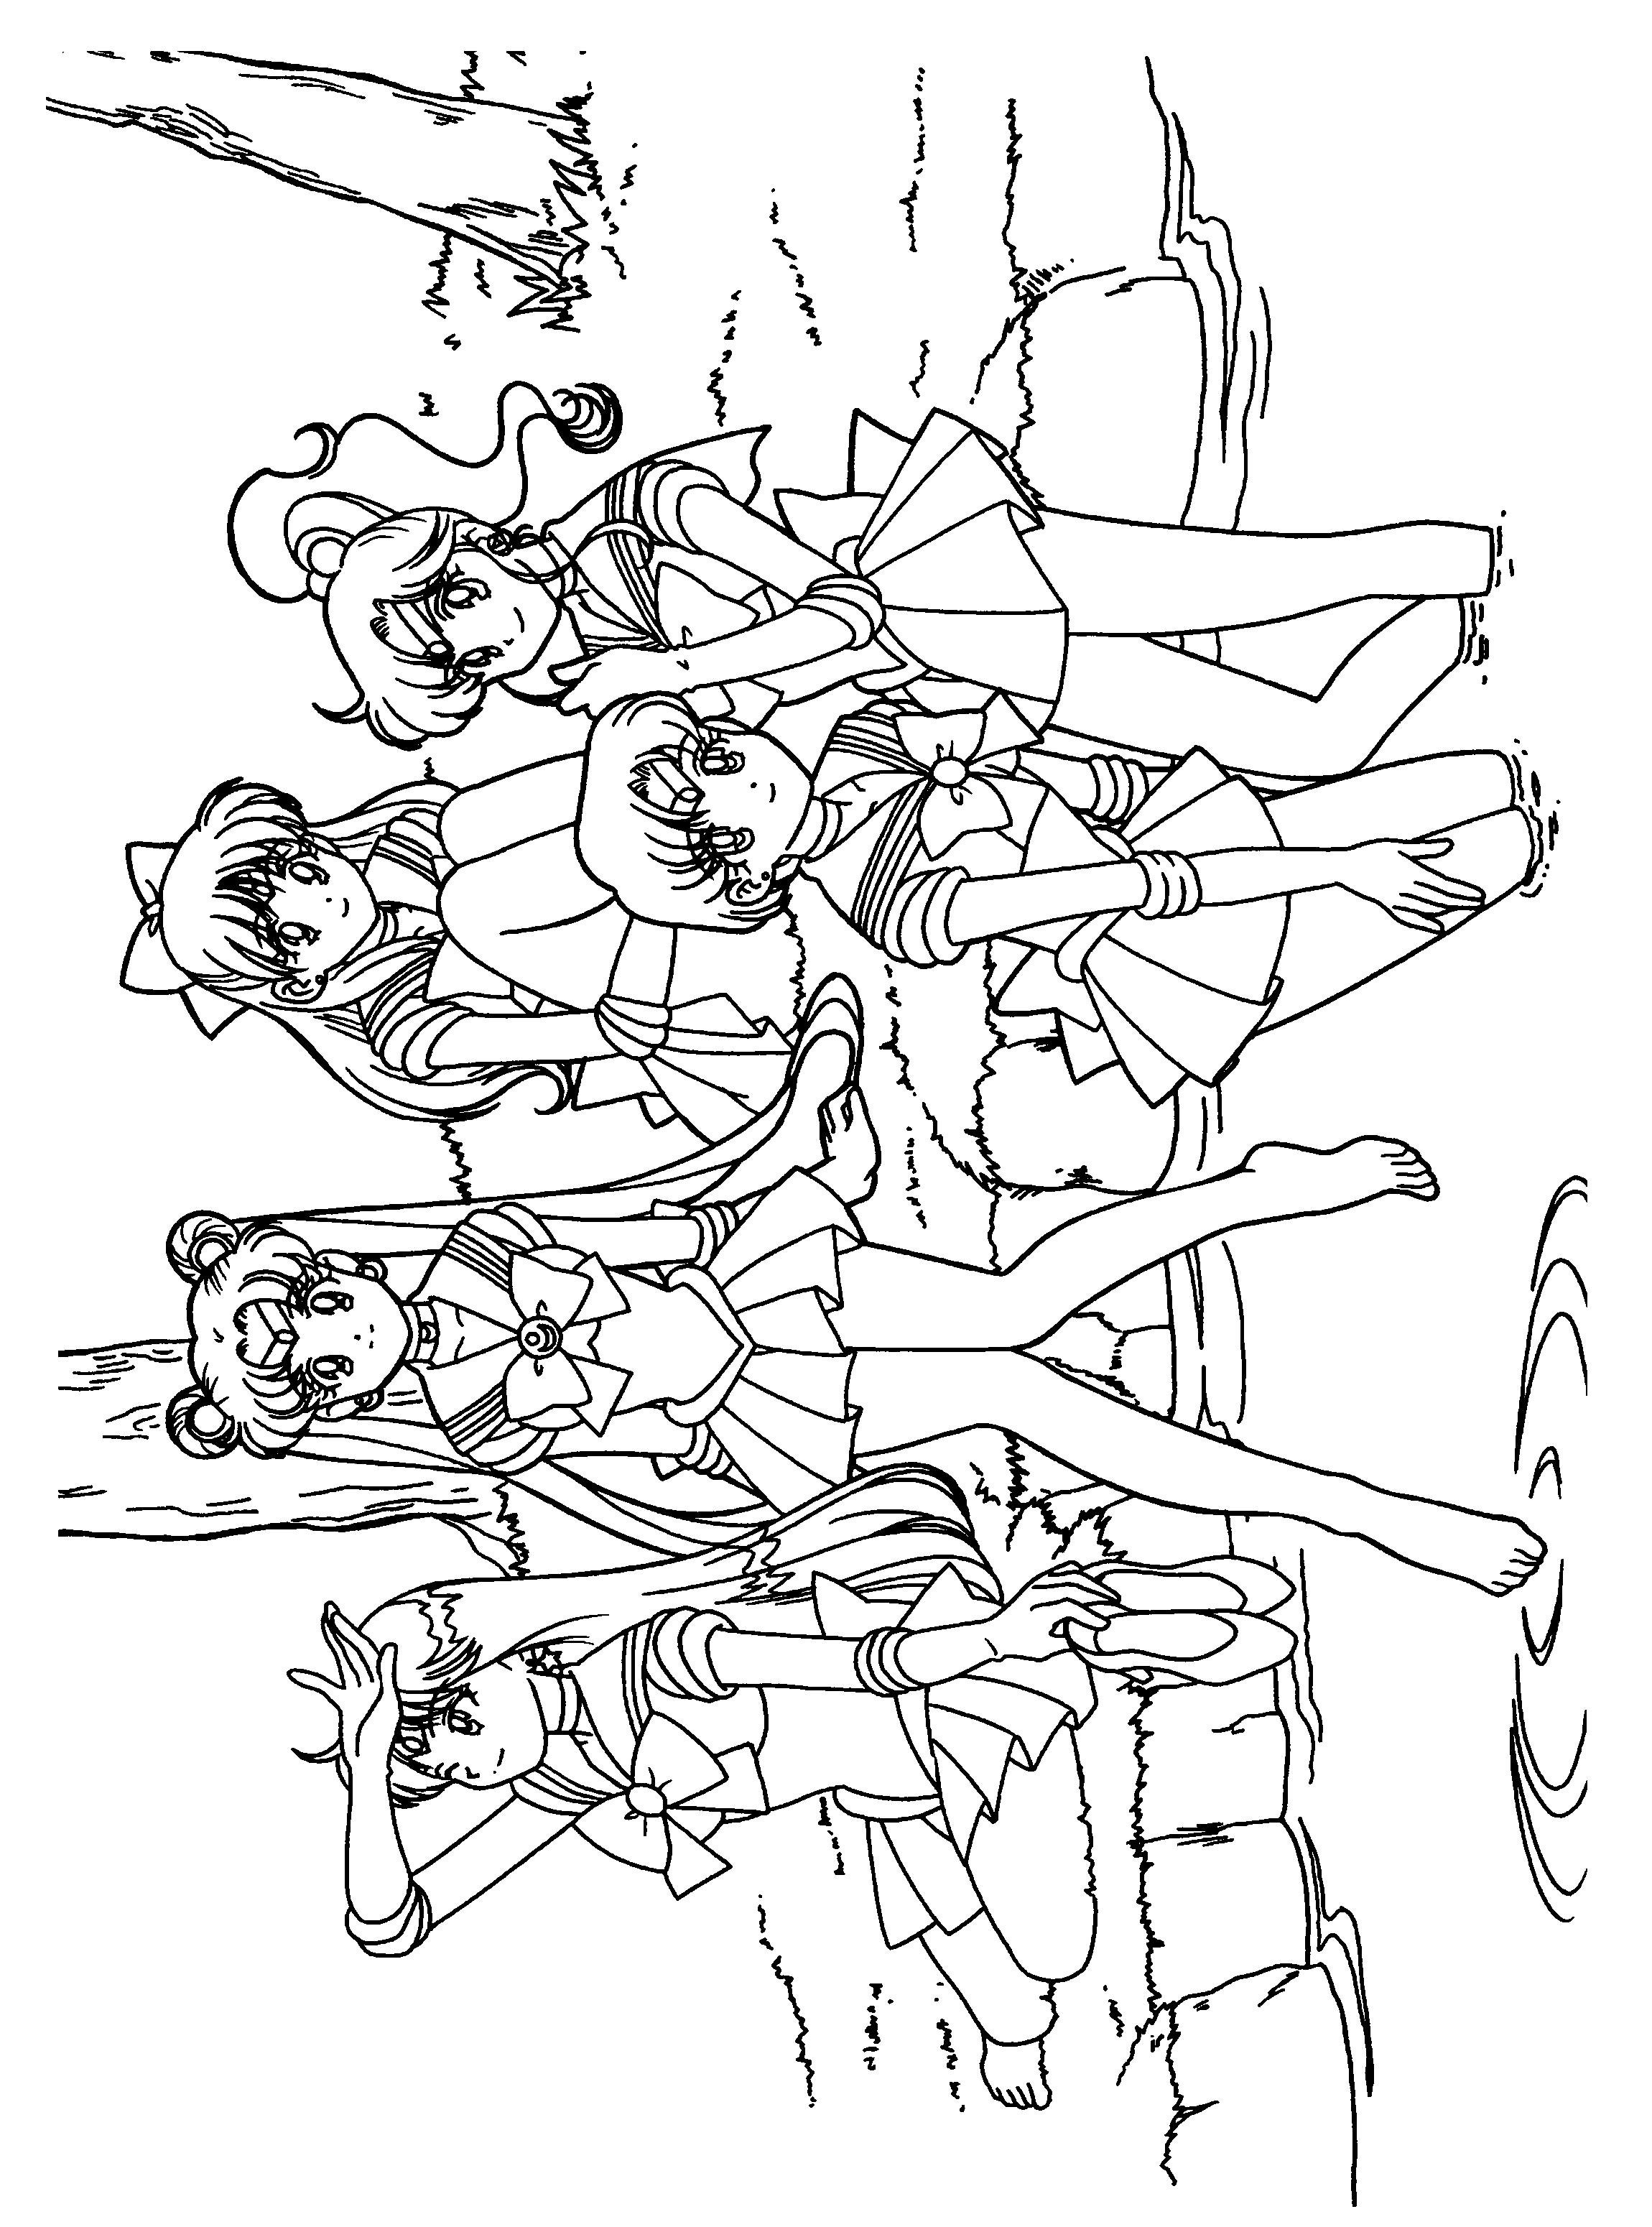 Sailormoon coloring pages